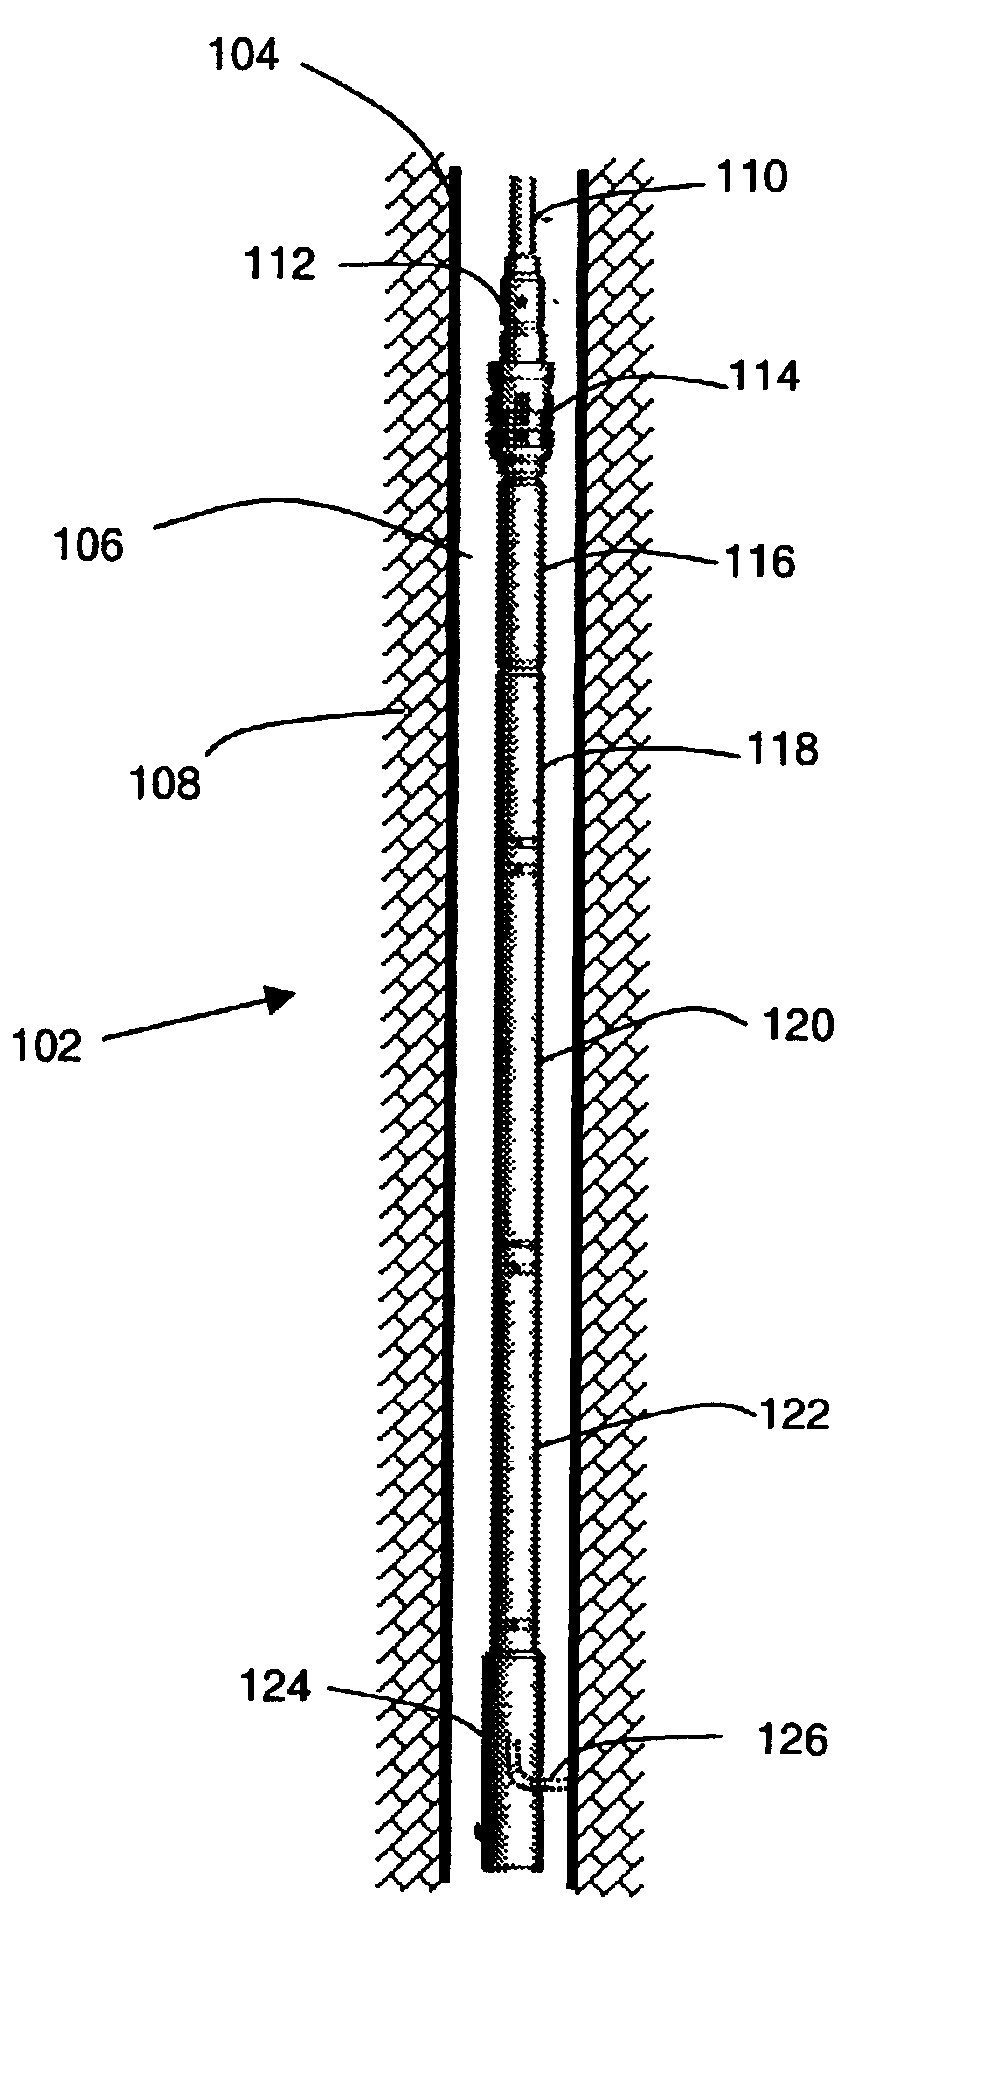 System and method for installation and use of devices in microboreholes